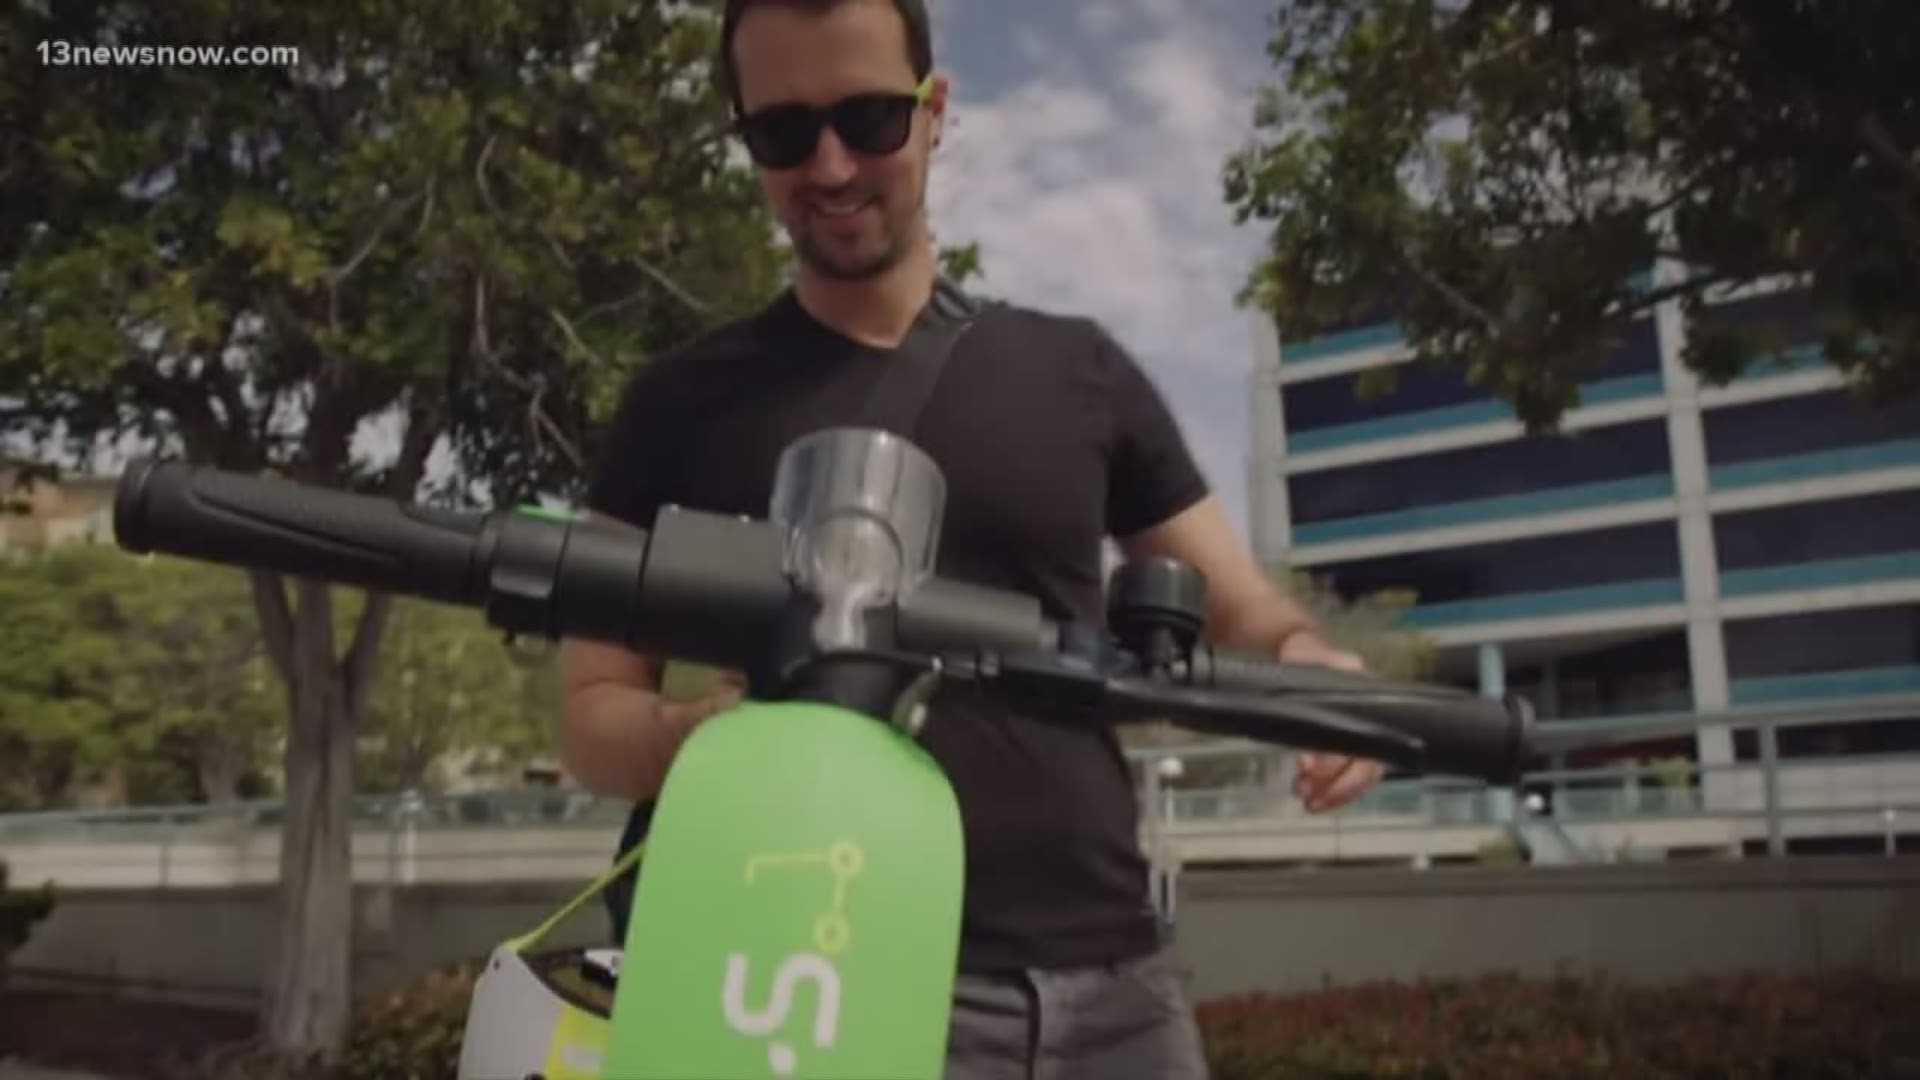 Norfolk City Council approved a shared scooter pilot program with Lime during Tuesday's city council meeting.